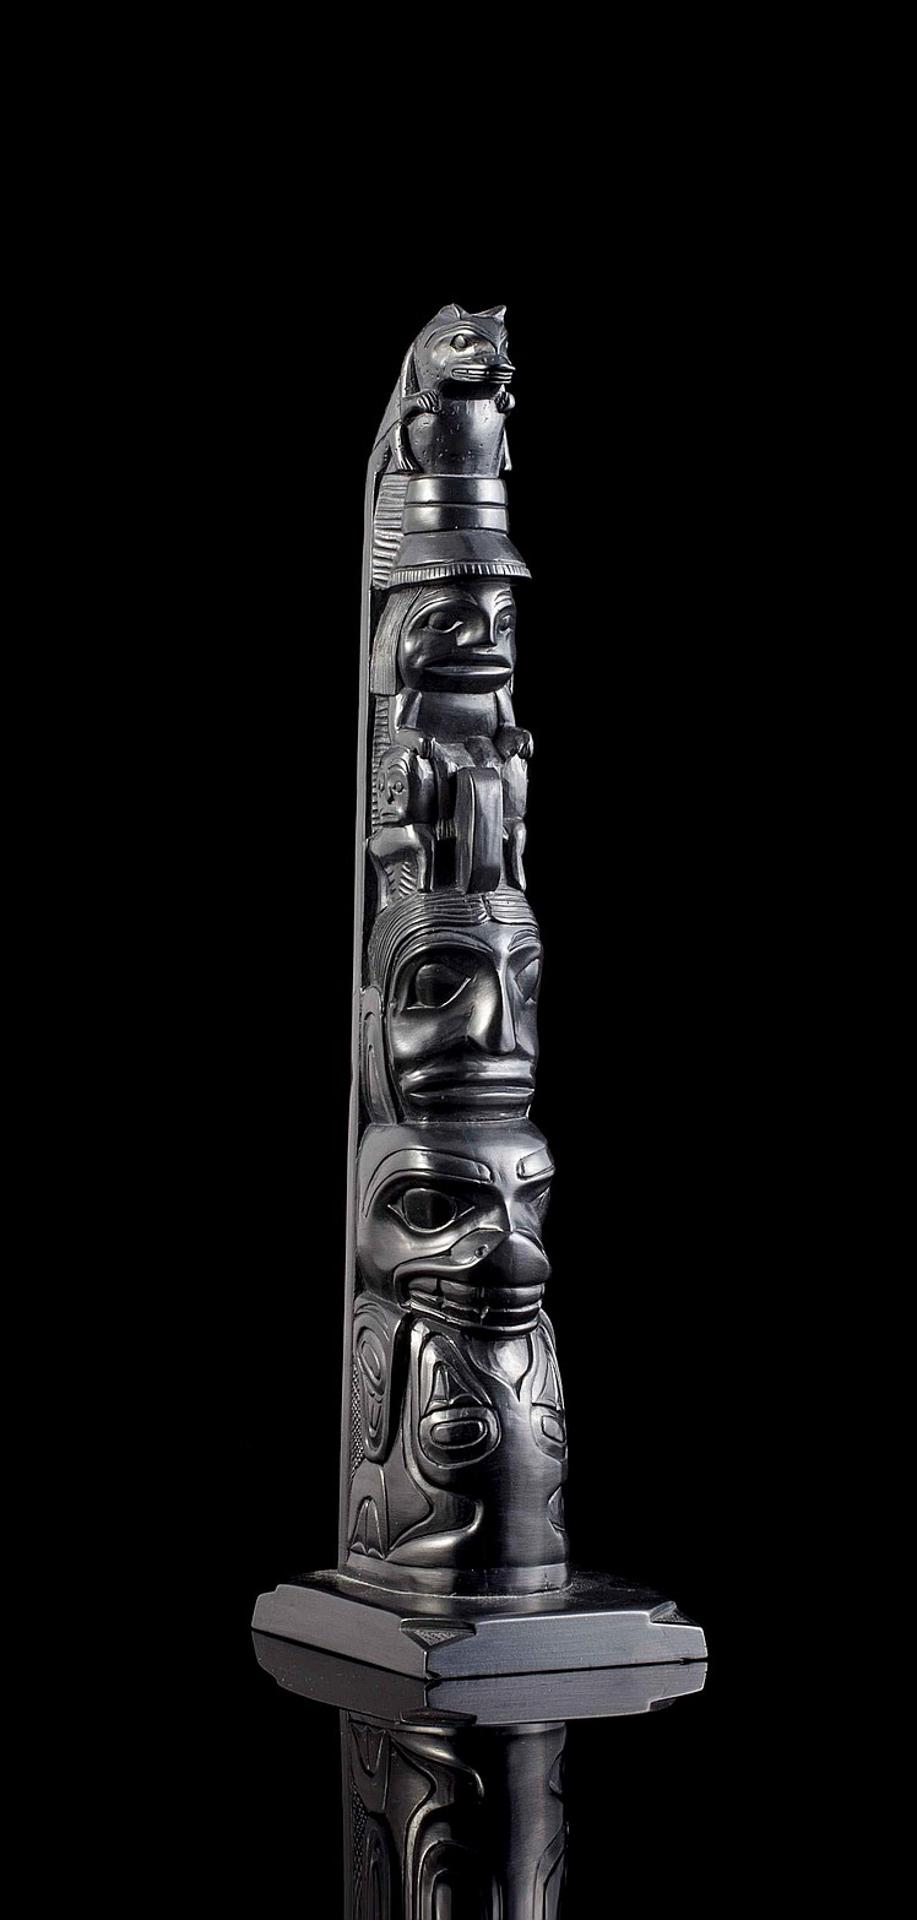 Rufus Moody (1923-1998) - a tall argillite pole depicting Frog